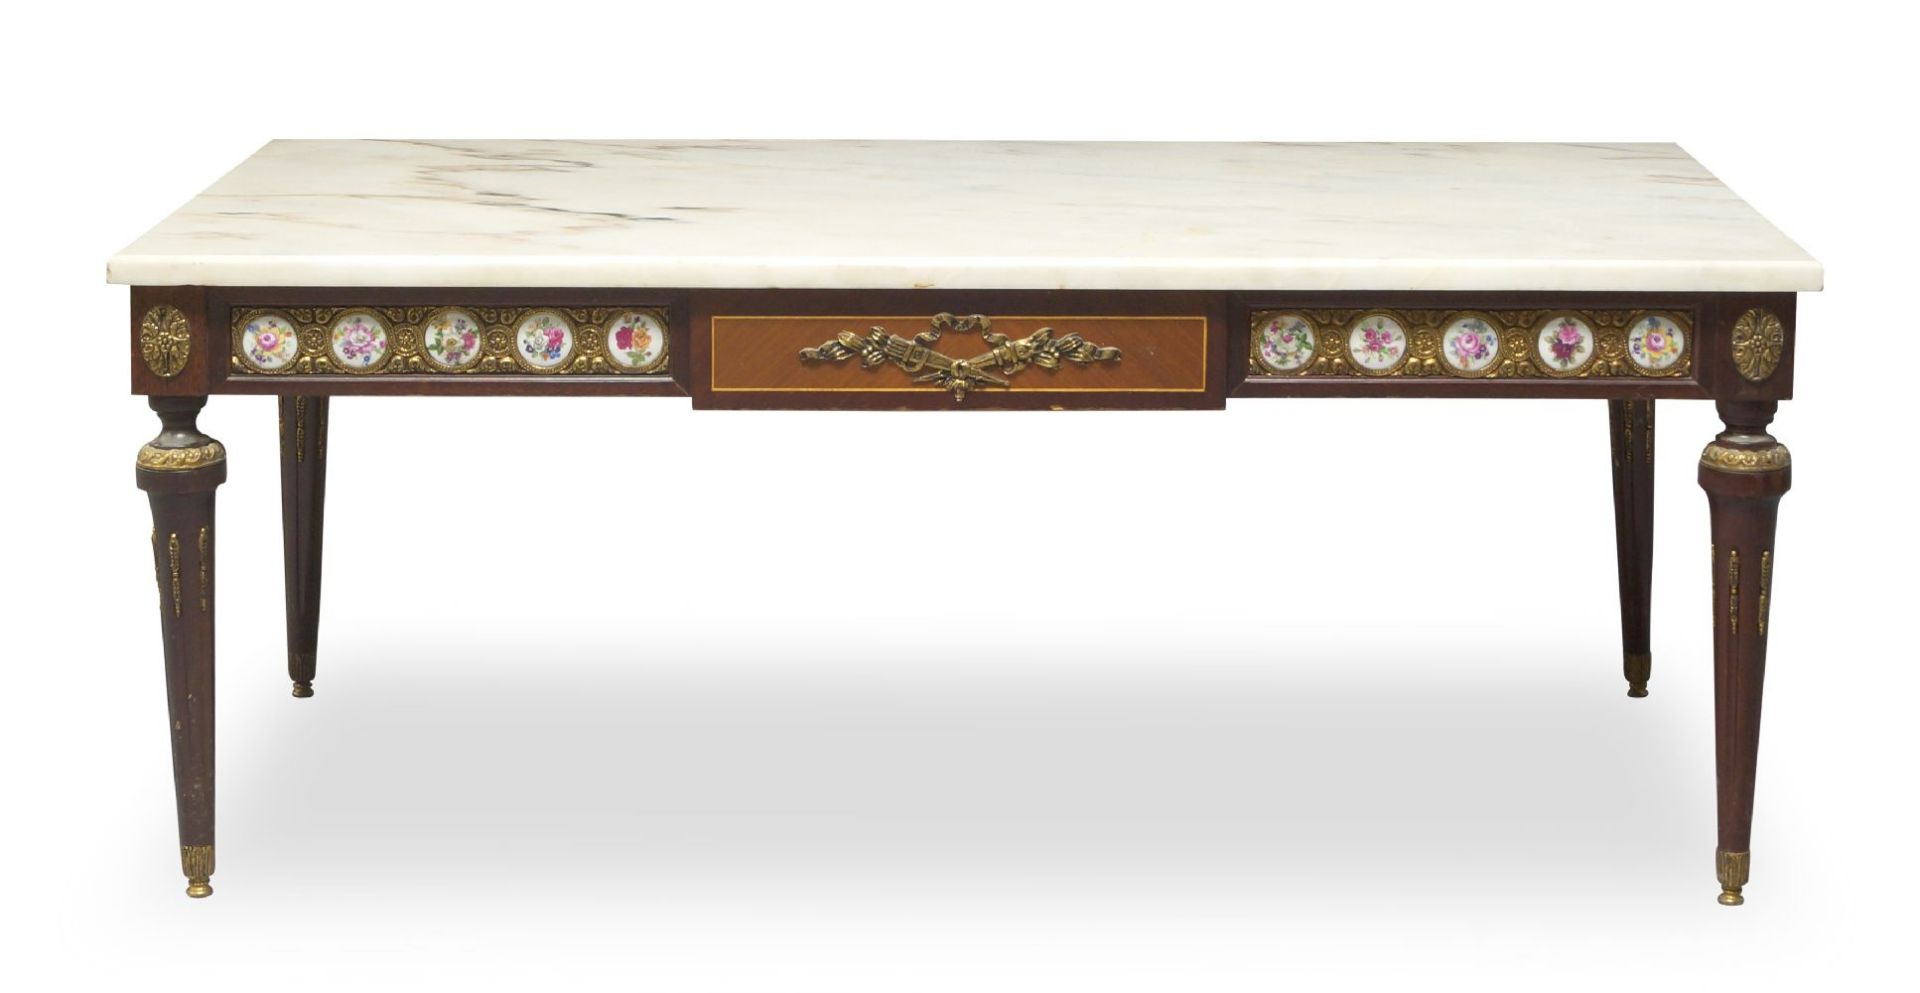 A Louis XVI style coffee table, of recent manufacture, with marble top, the frieze applied with